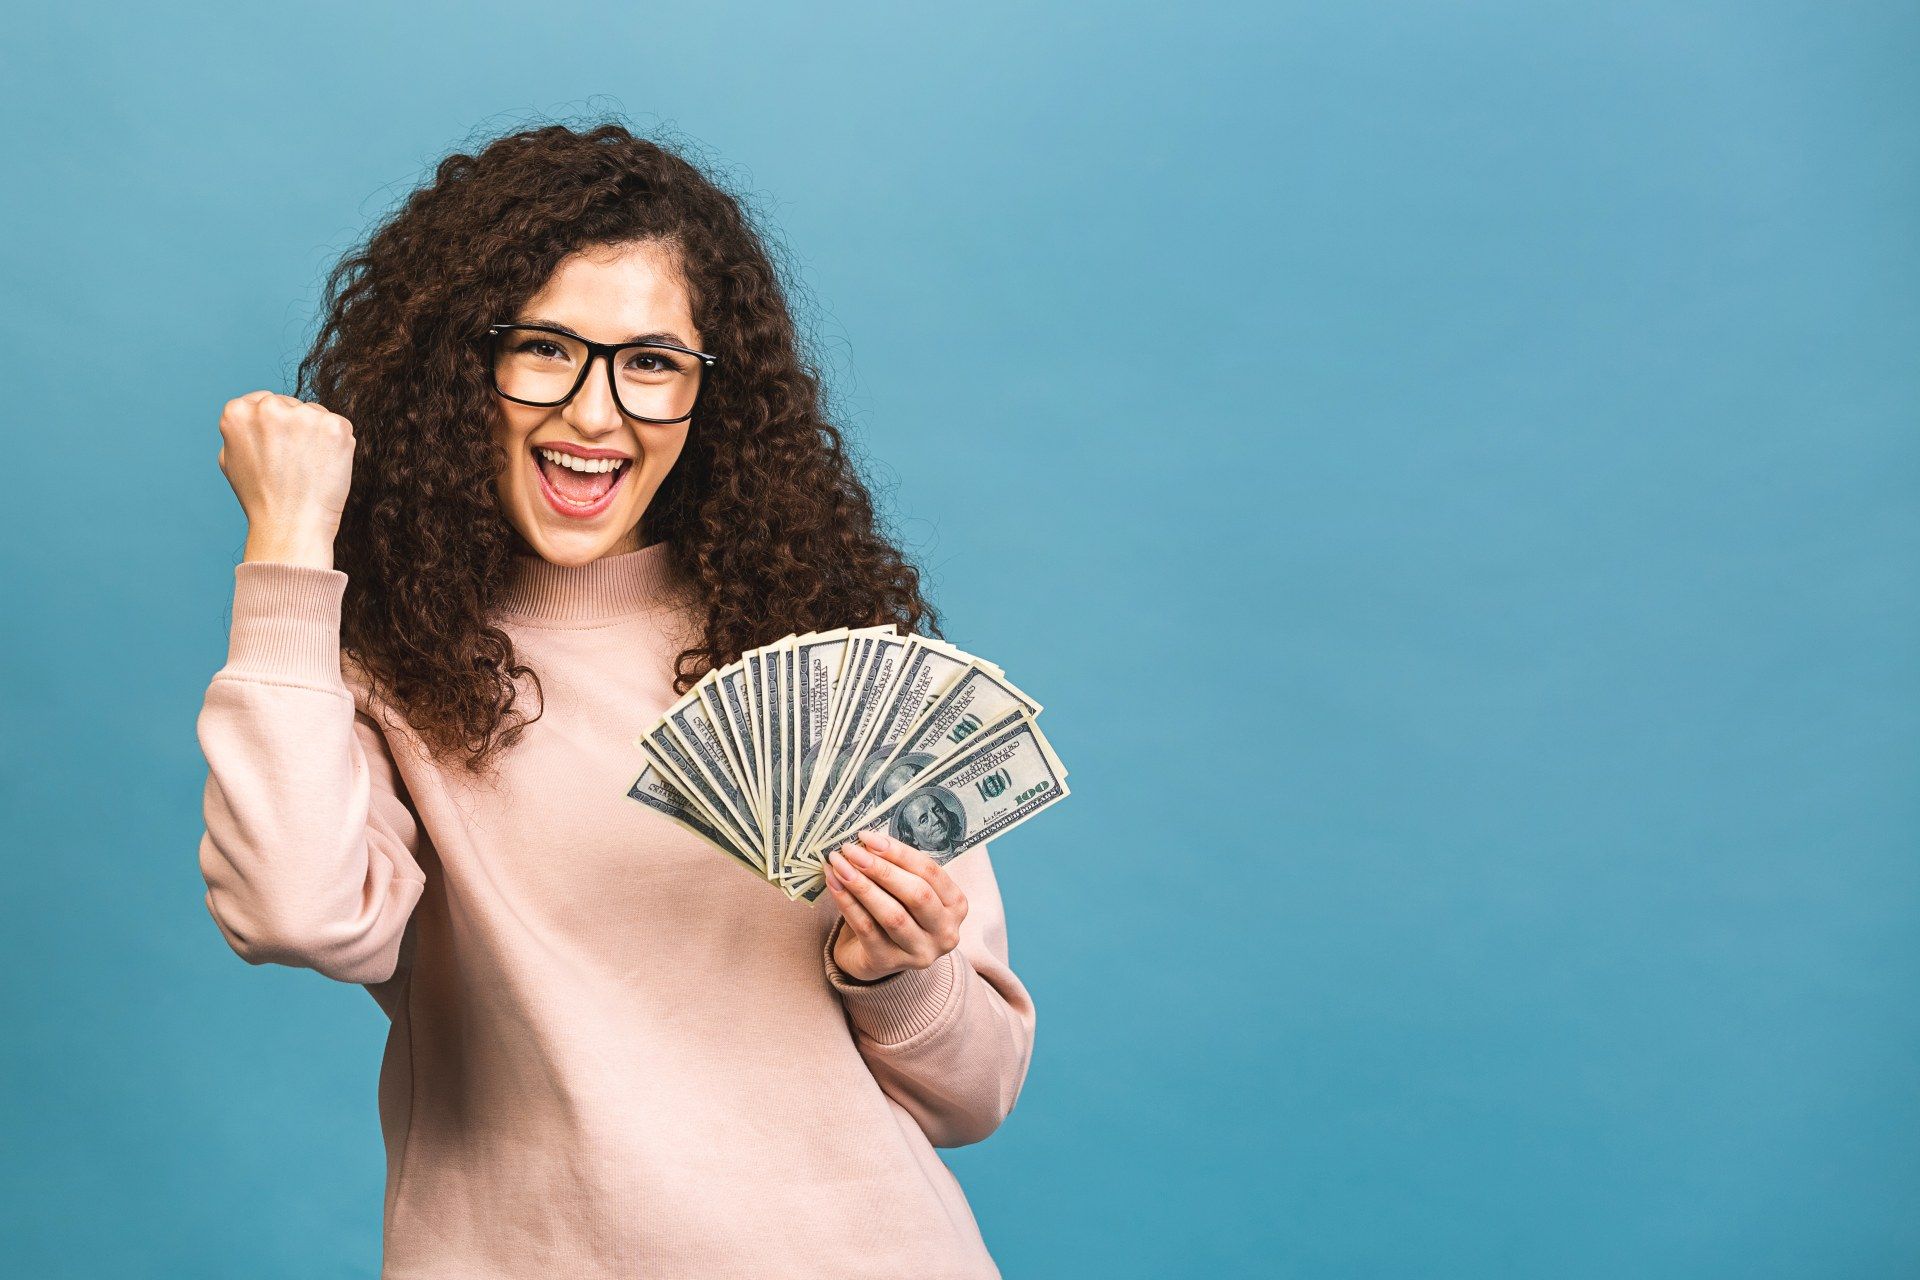 A happy woman wearing glasses celebrates while holding cash against a blue-green background